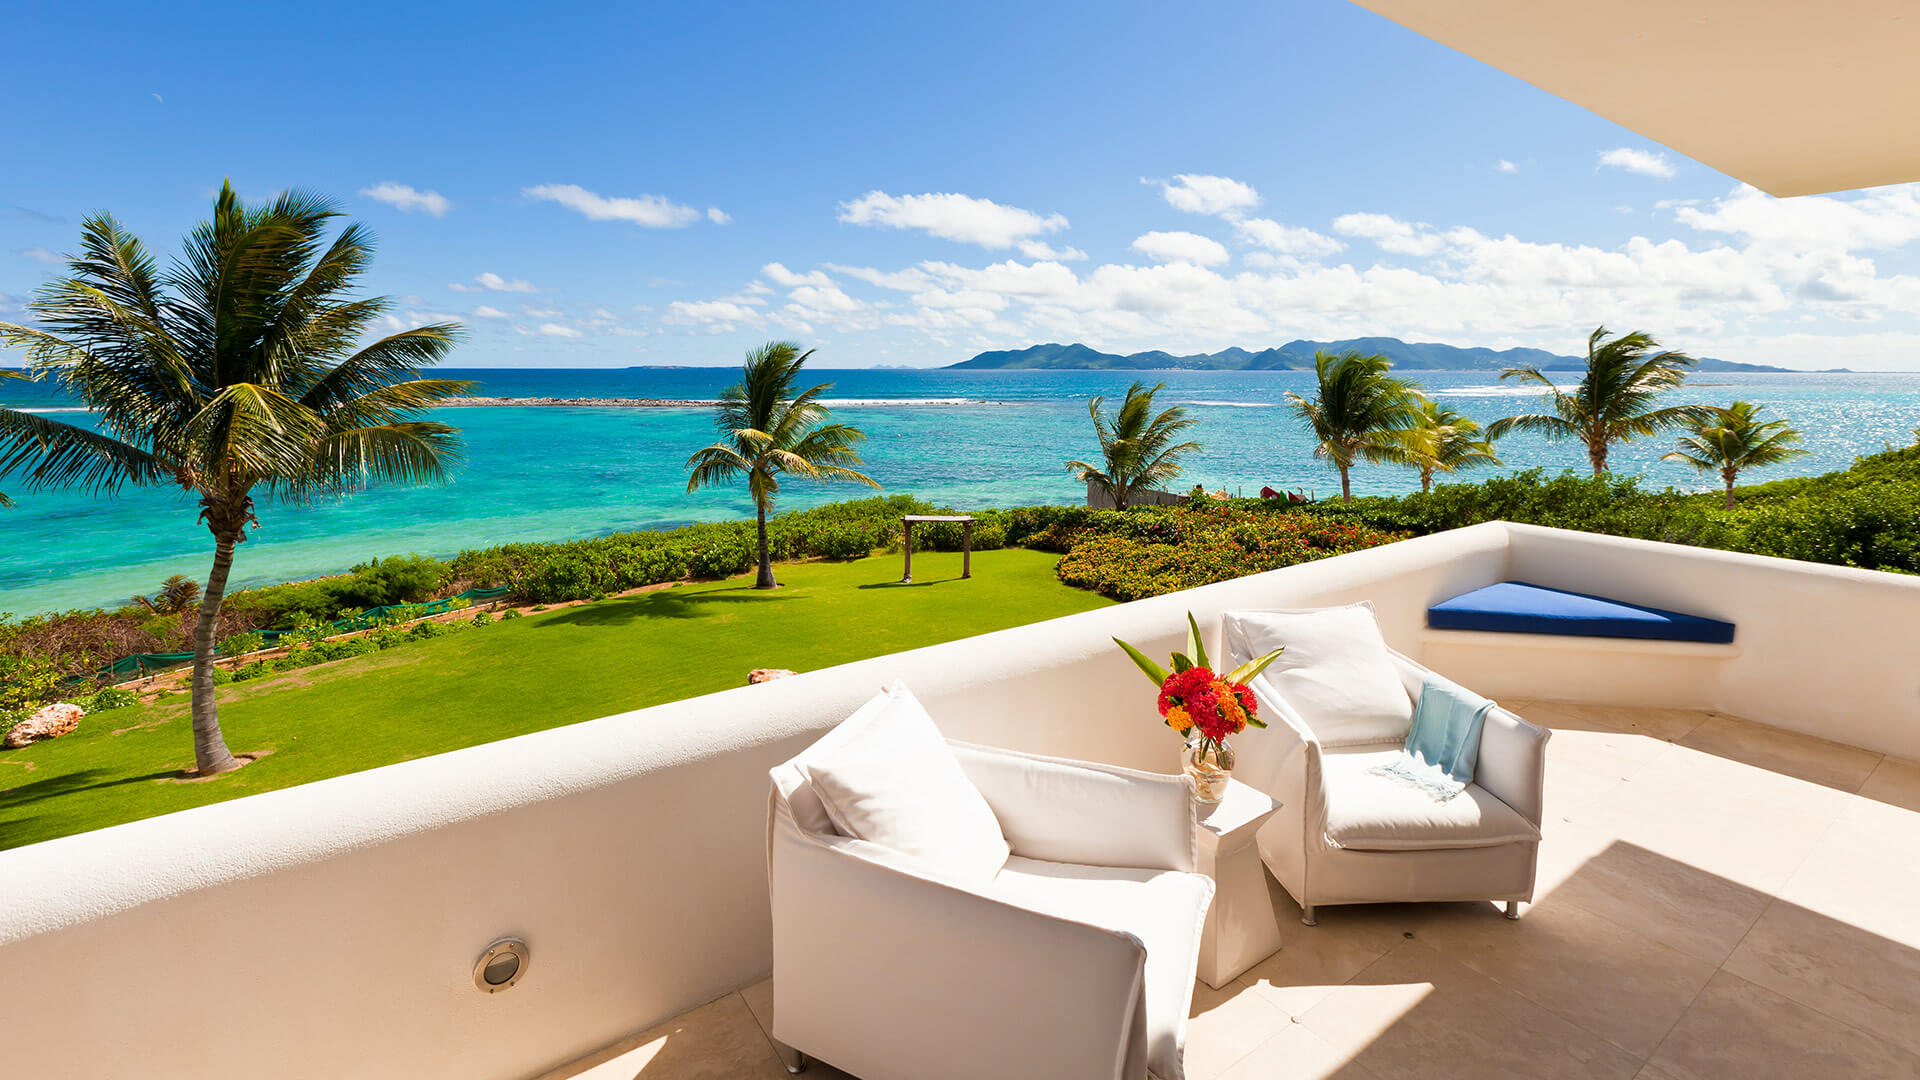 Le Bleu Villa surrounds guests with tropical beauty that makes Anguilla the perfect destination for a luxury villa rental vacation.
